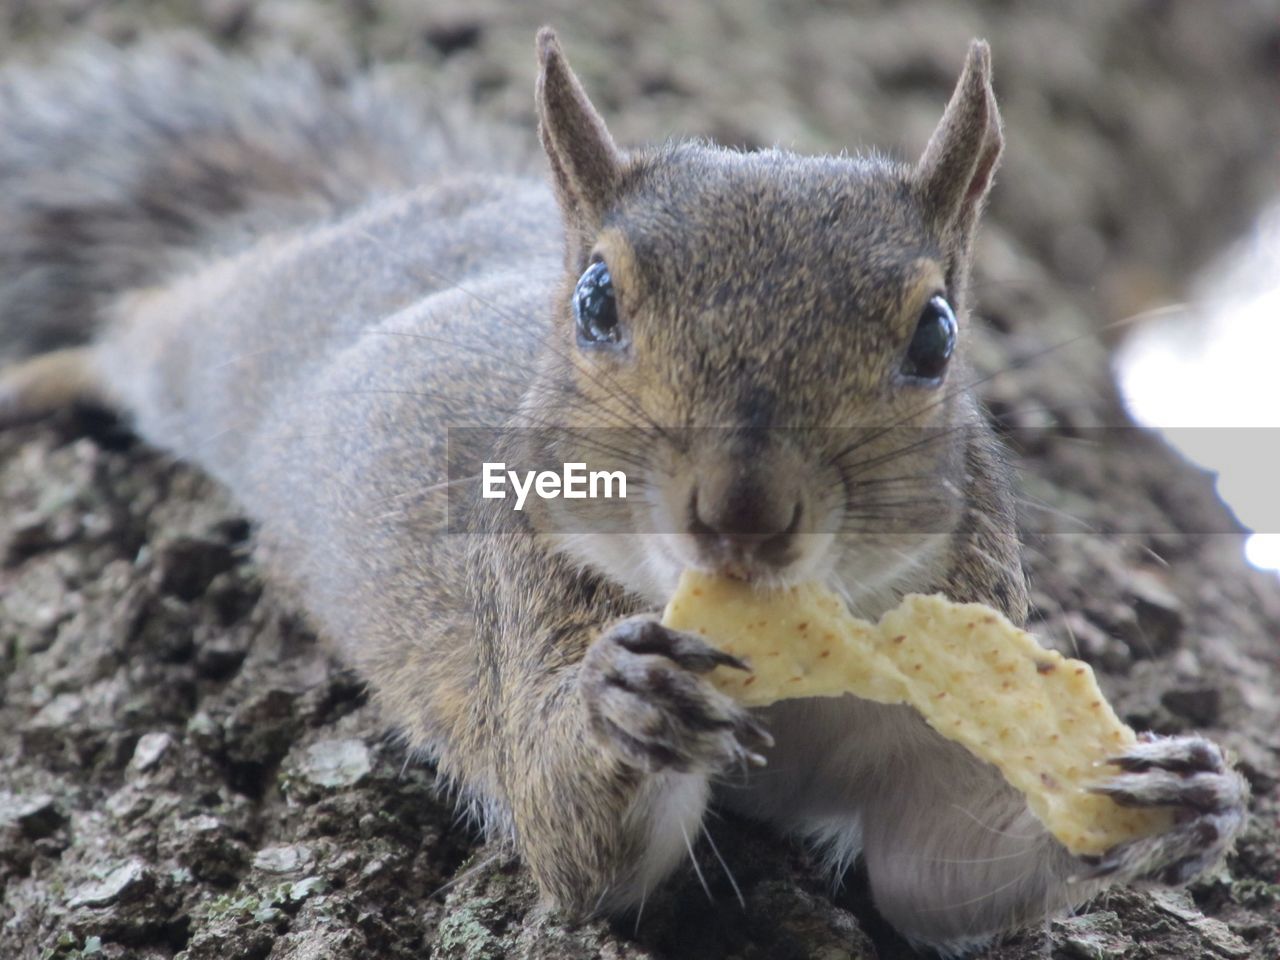 Portrait of squirrel eating potato chip on field